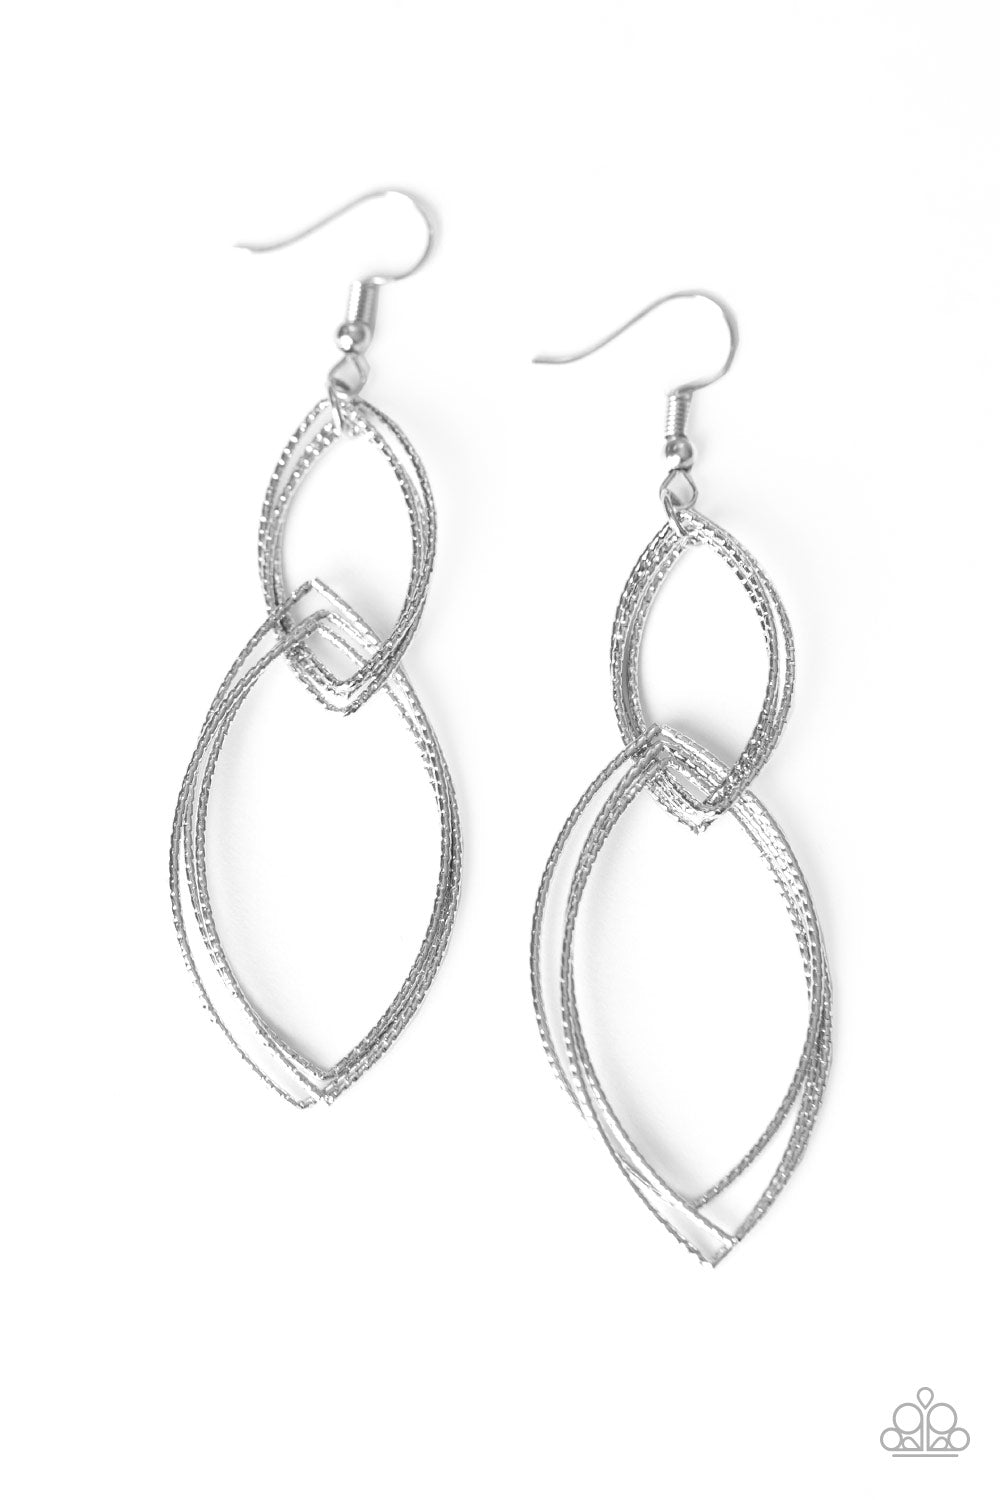 Endless Echo - Silver Earrings - Paparazzi Accessories 